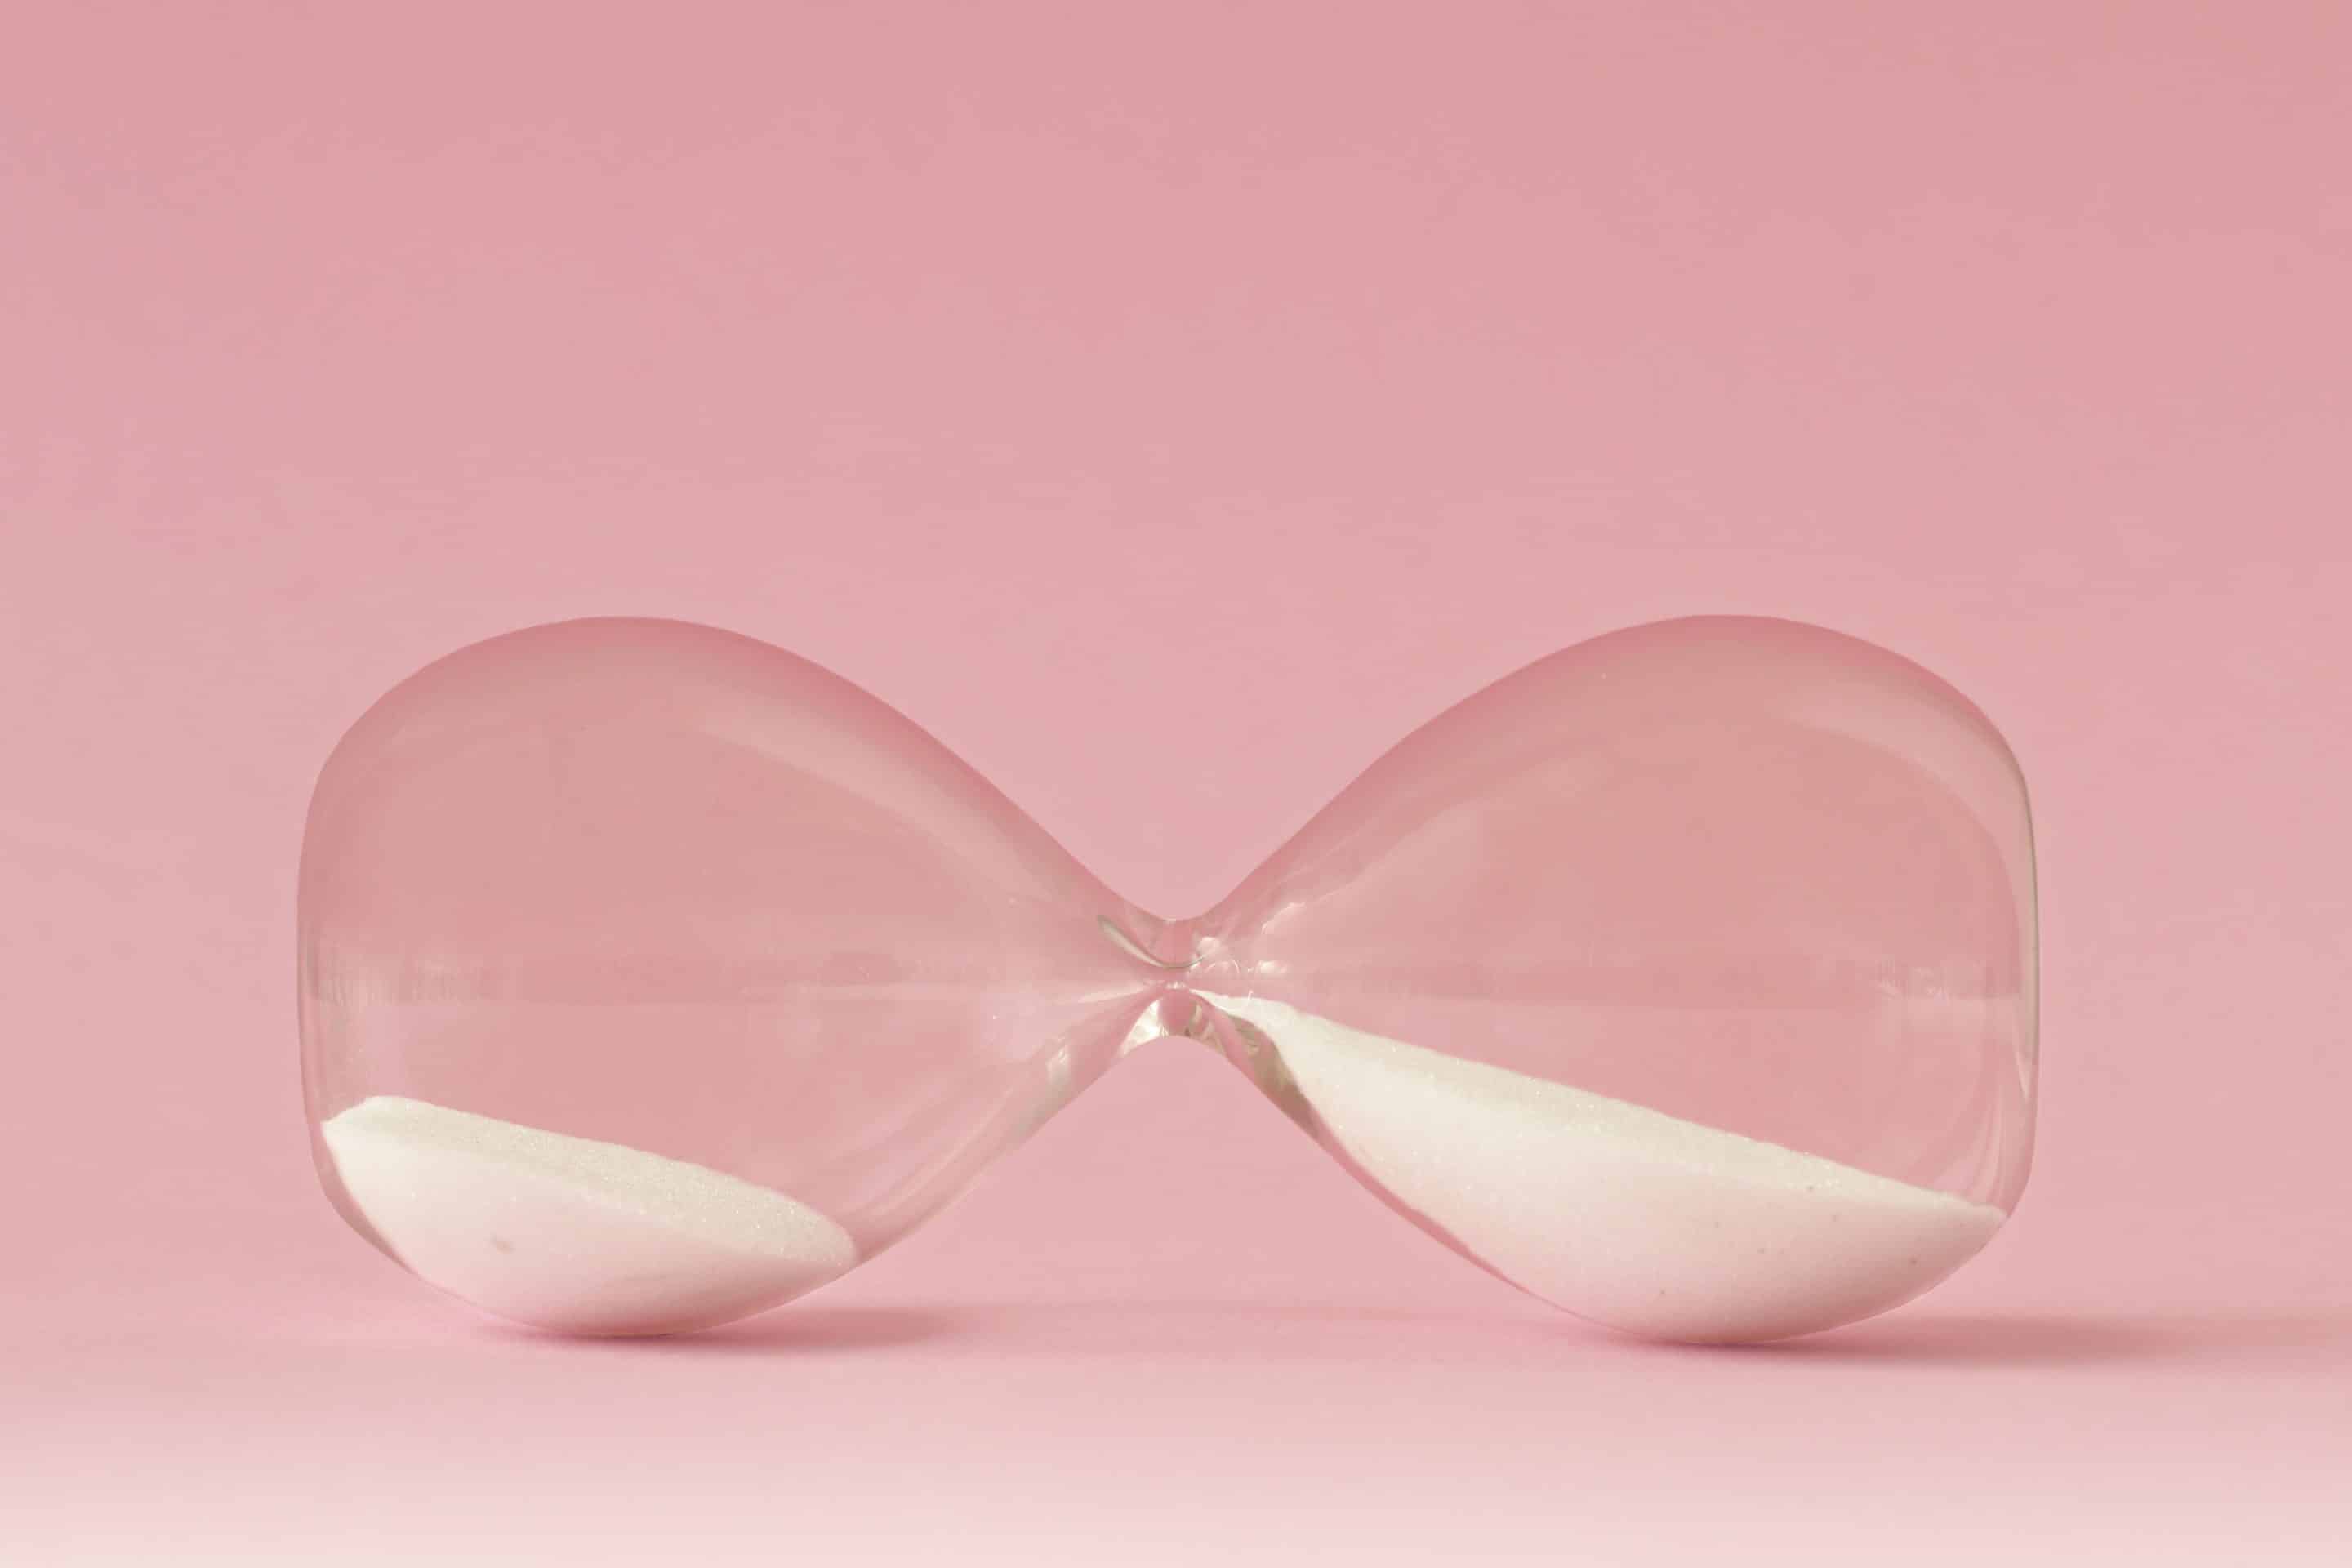 Hourglass,Lying,On,Pink,Background,-,Concept,Of,Time,And